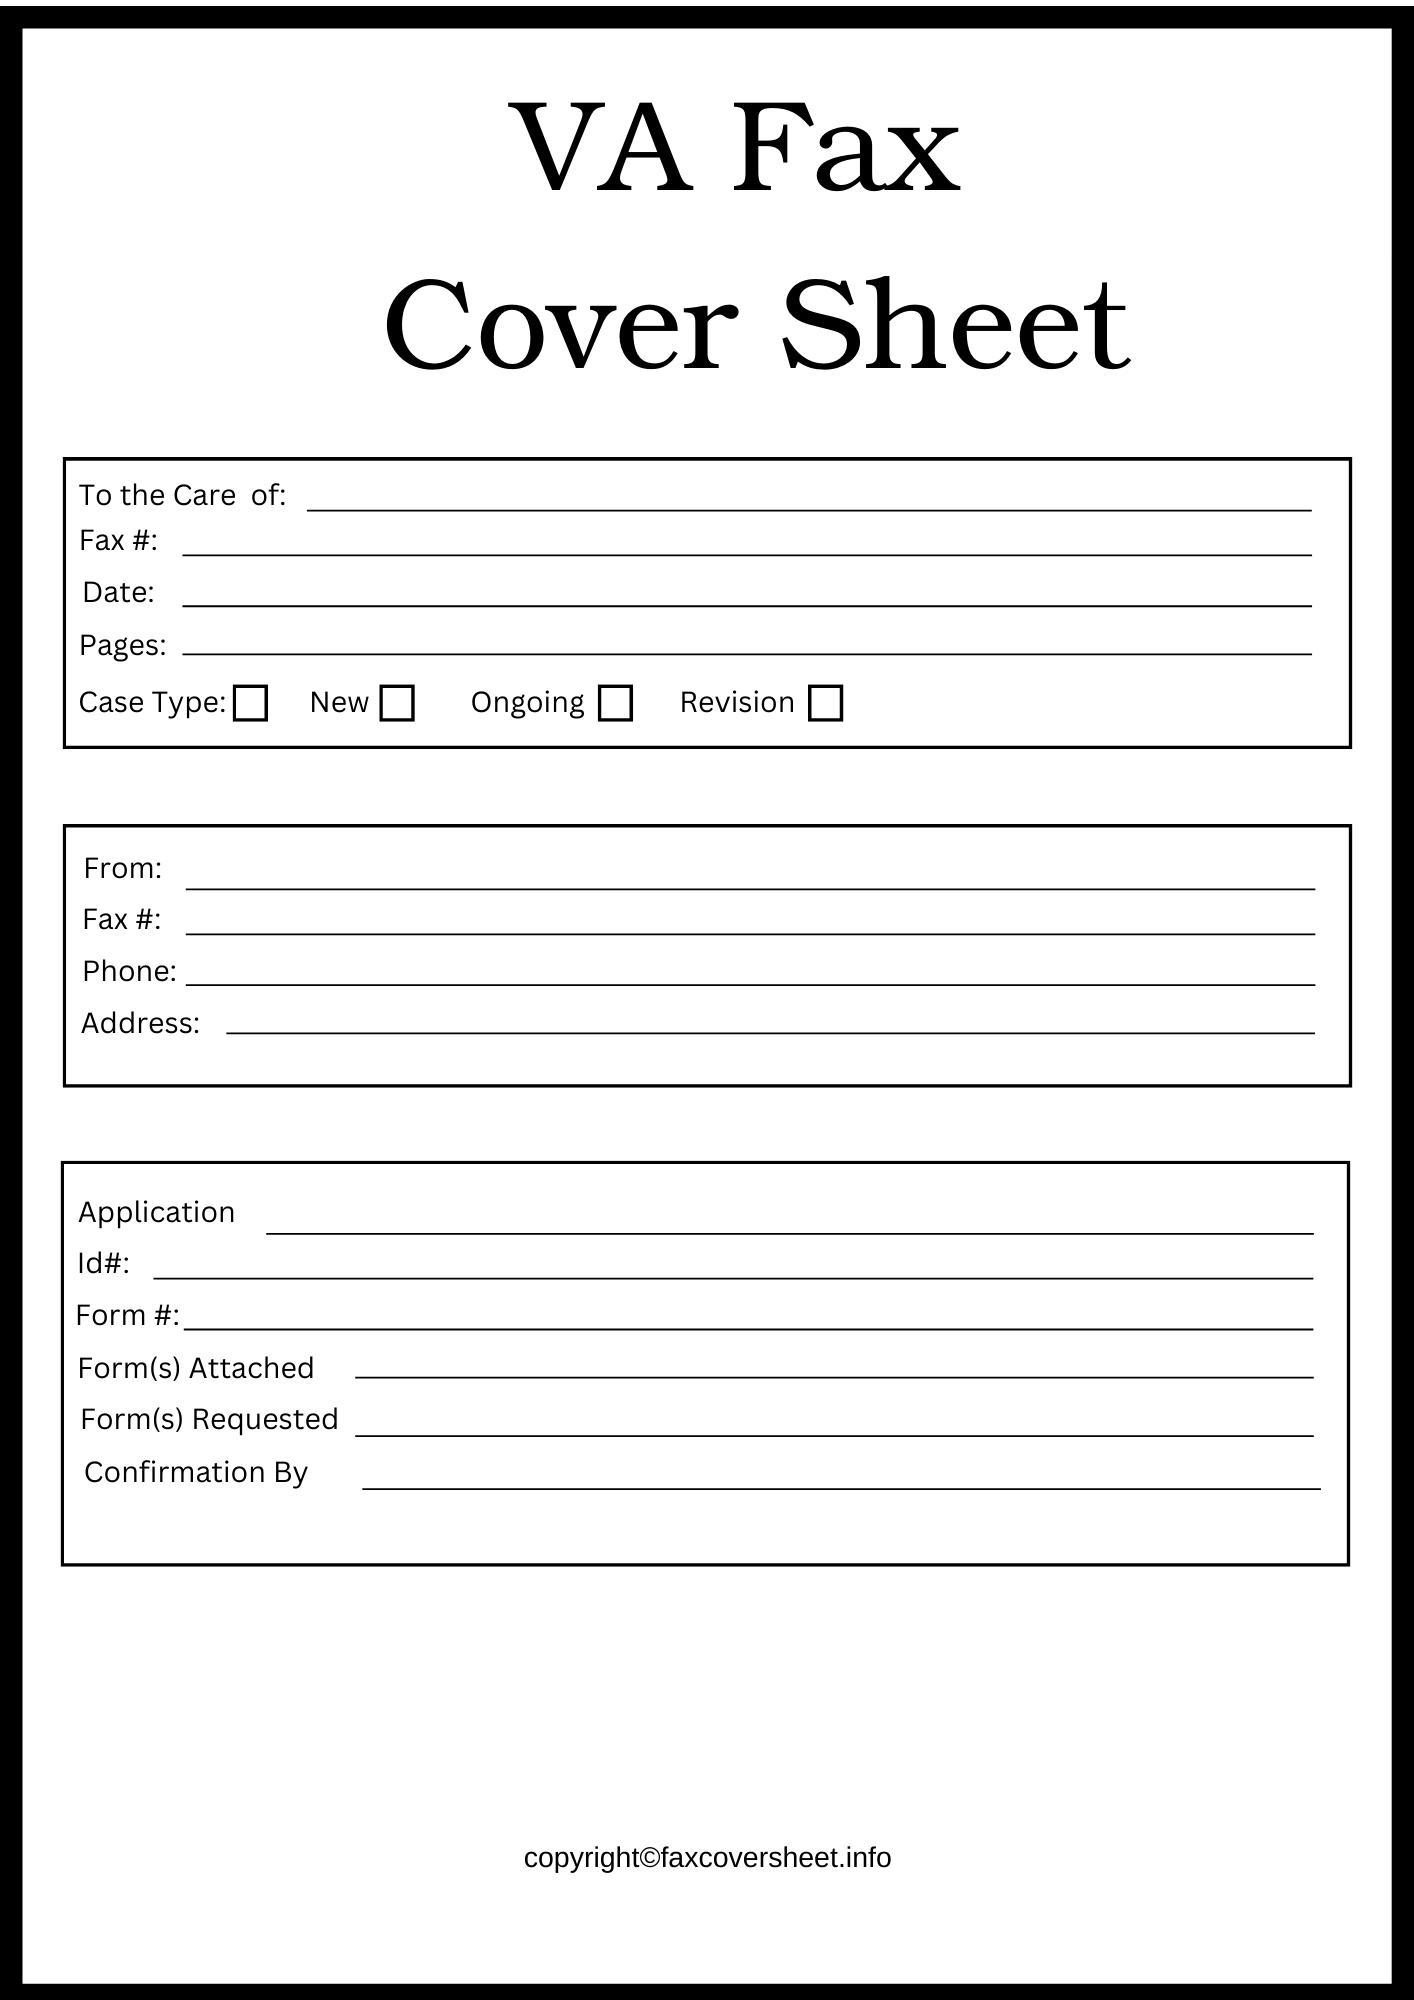 VA Fax Cover Sheet Templates Printable in PDF & Word